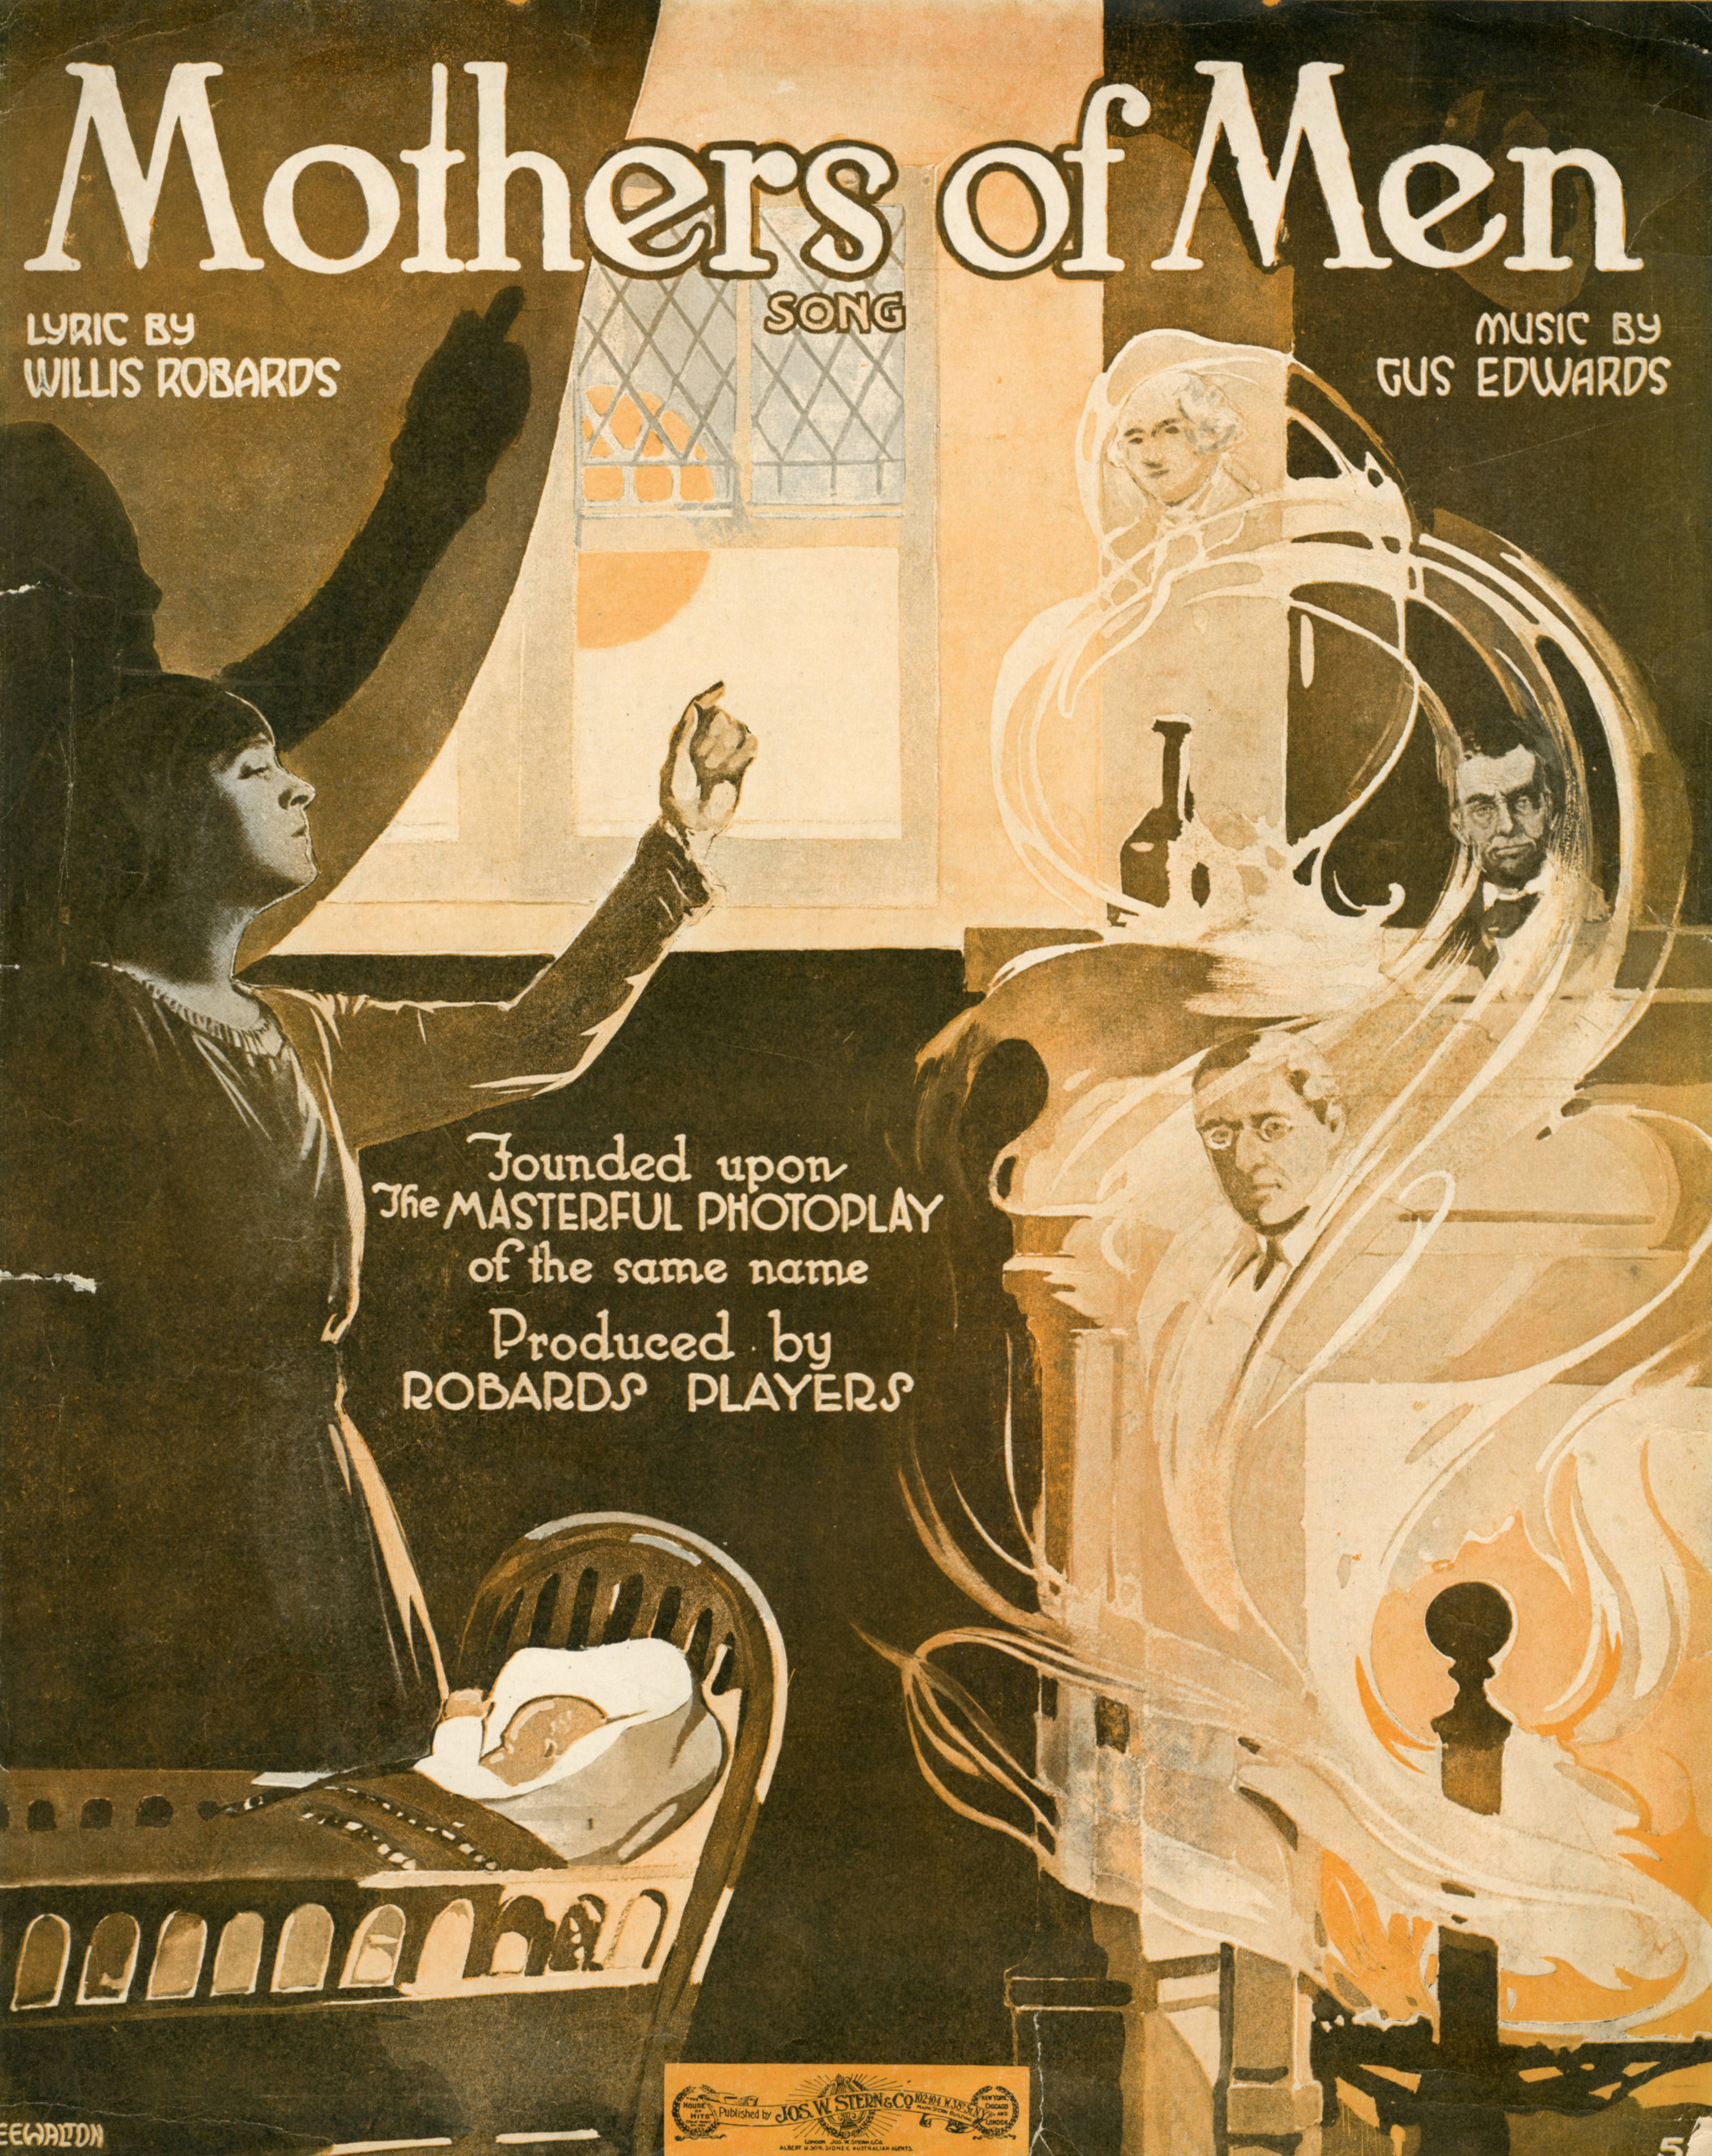 Sheet music cover - MOTHERS OF MEN - SONG (1917)